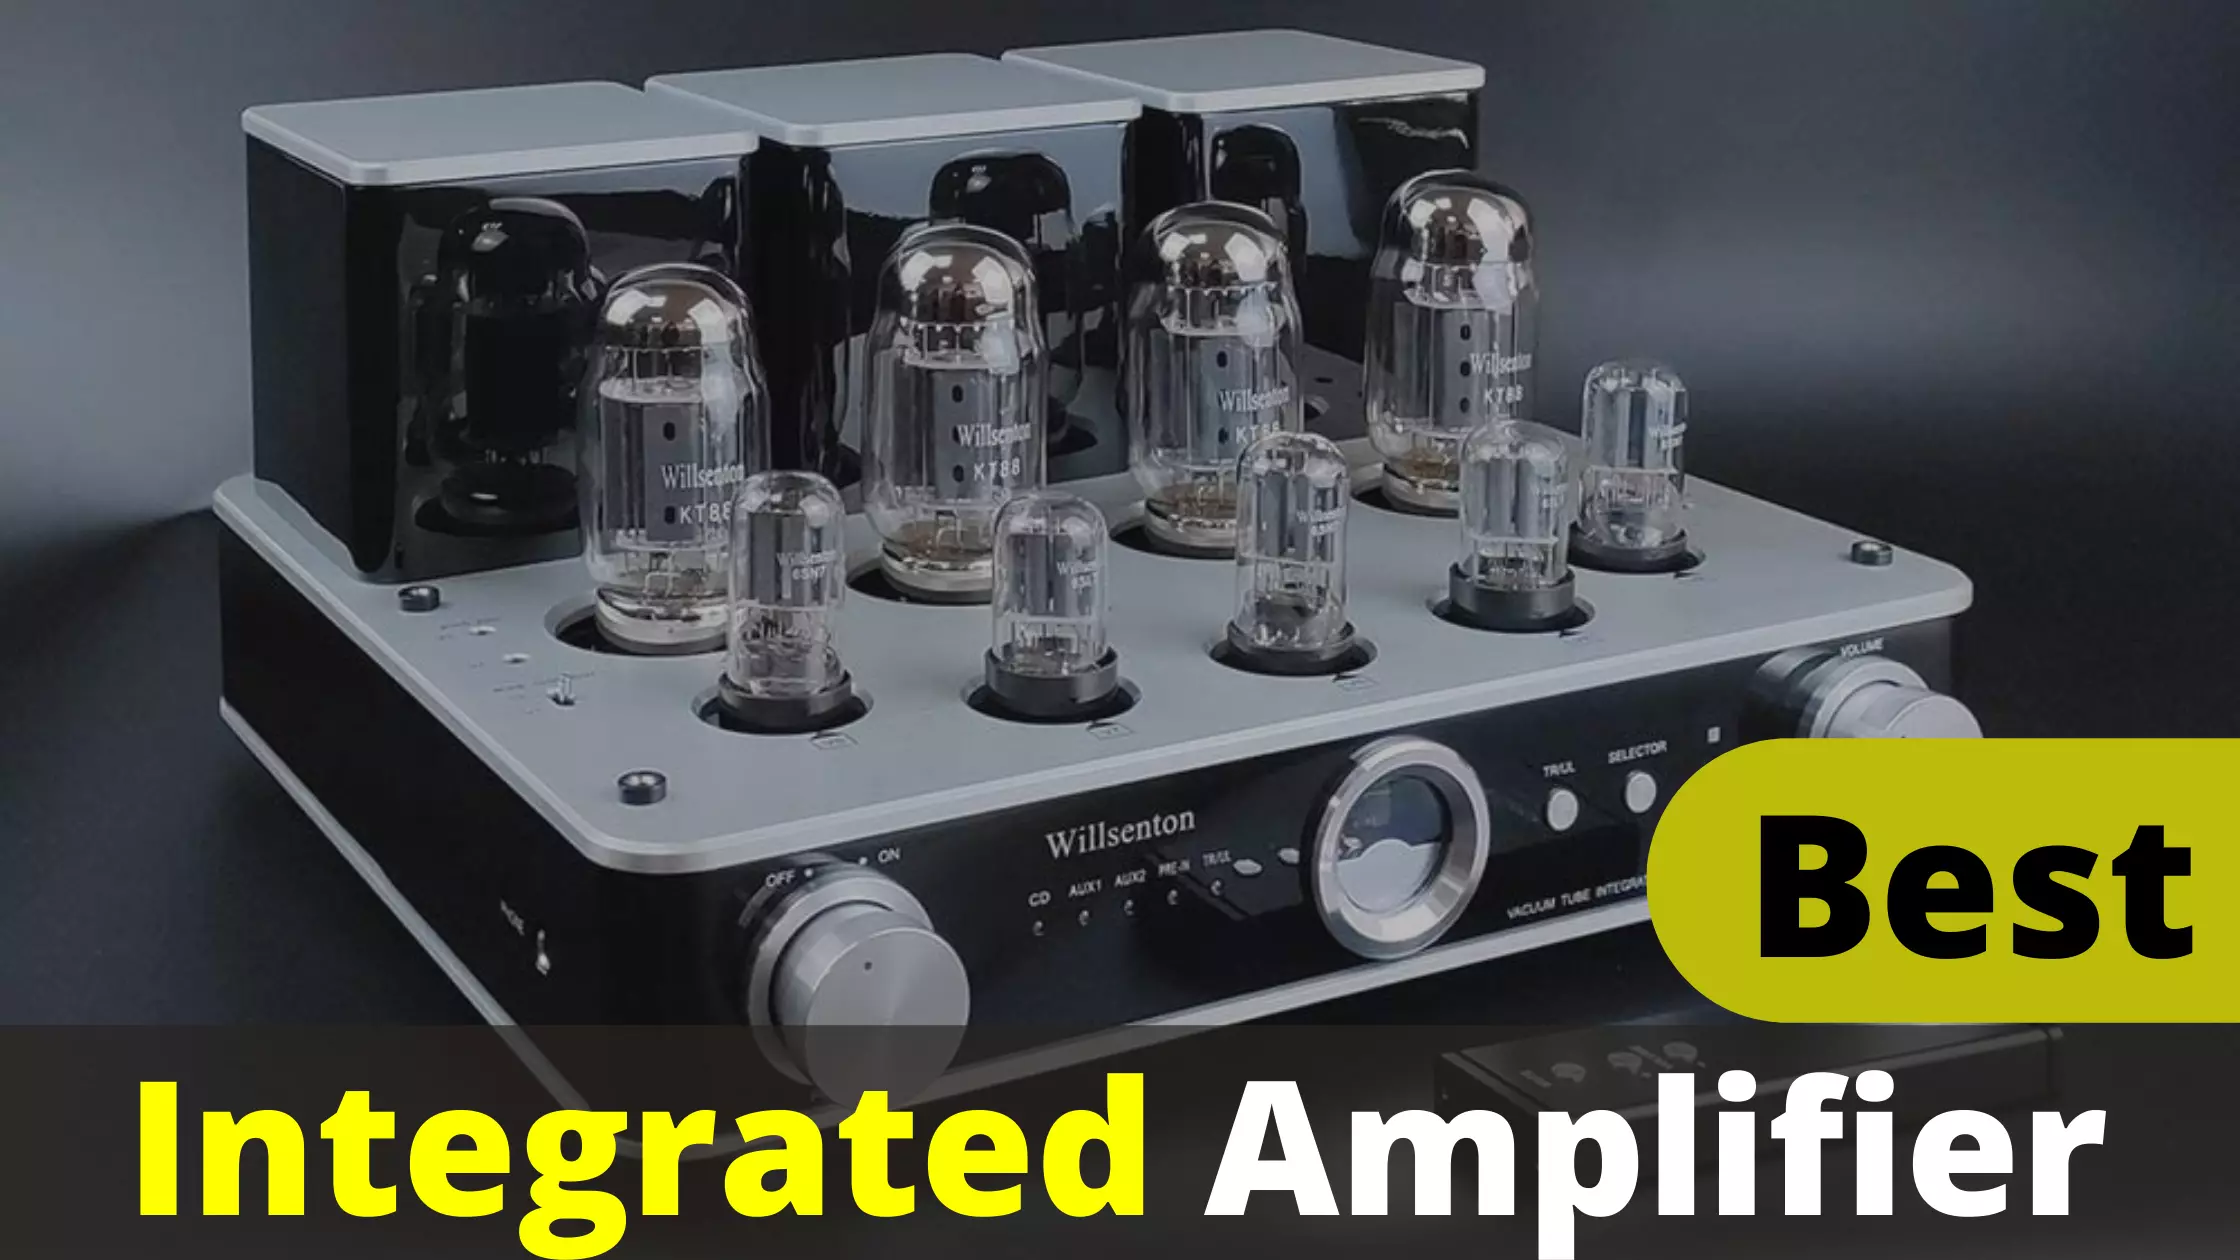 Best Integrated Amplifier With Products Comparison